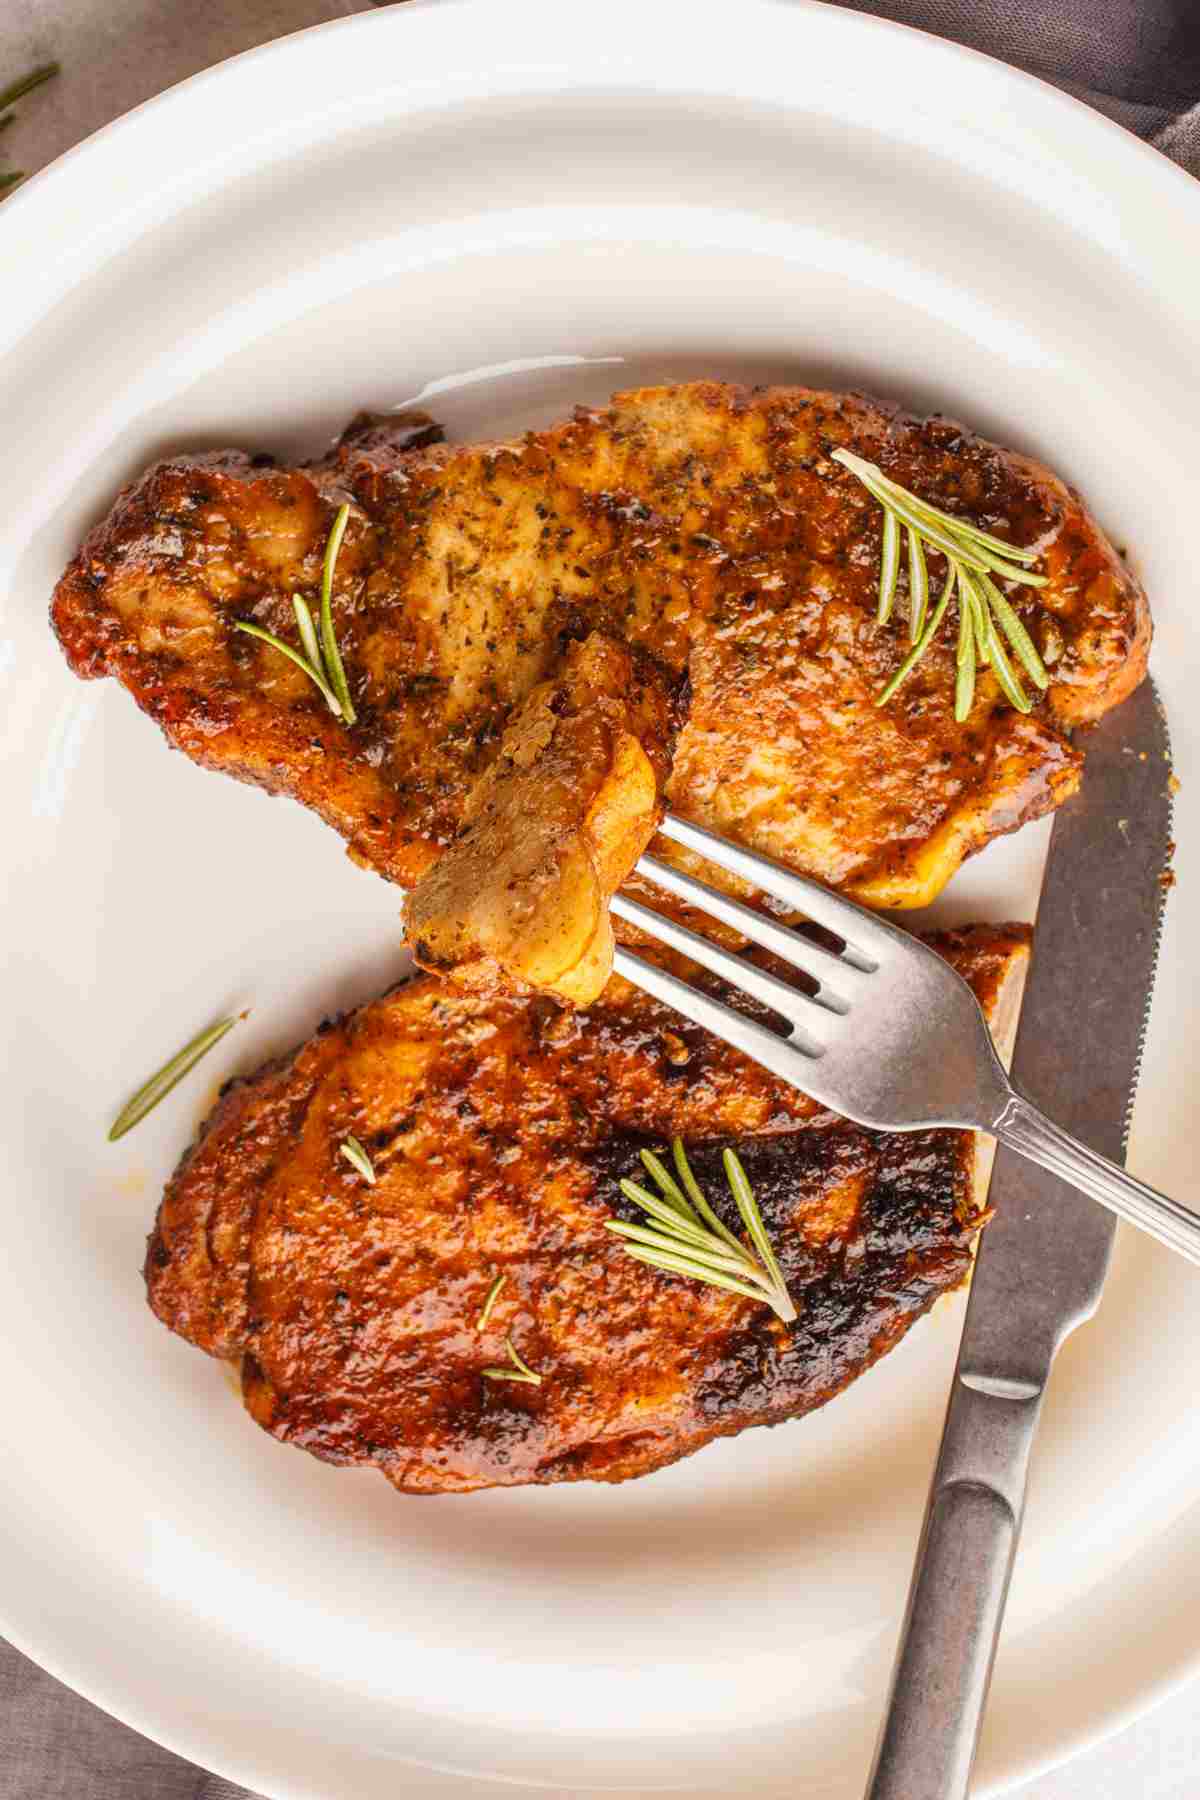 Ever wonder what’s the best Oven Temp for Pork Chops so that they are tender and juicy? Whether you’re cooking boneless or bone-in pork chops, the goal is for them to be as succulent and flavorful as possible. With the right oven temperature, your pork chops will be tender, tasty, and ready to be served with all your favorite side dishes.